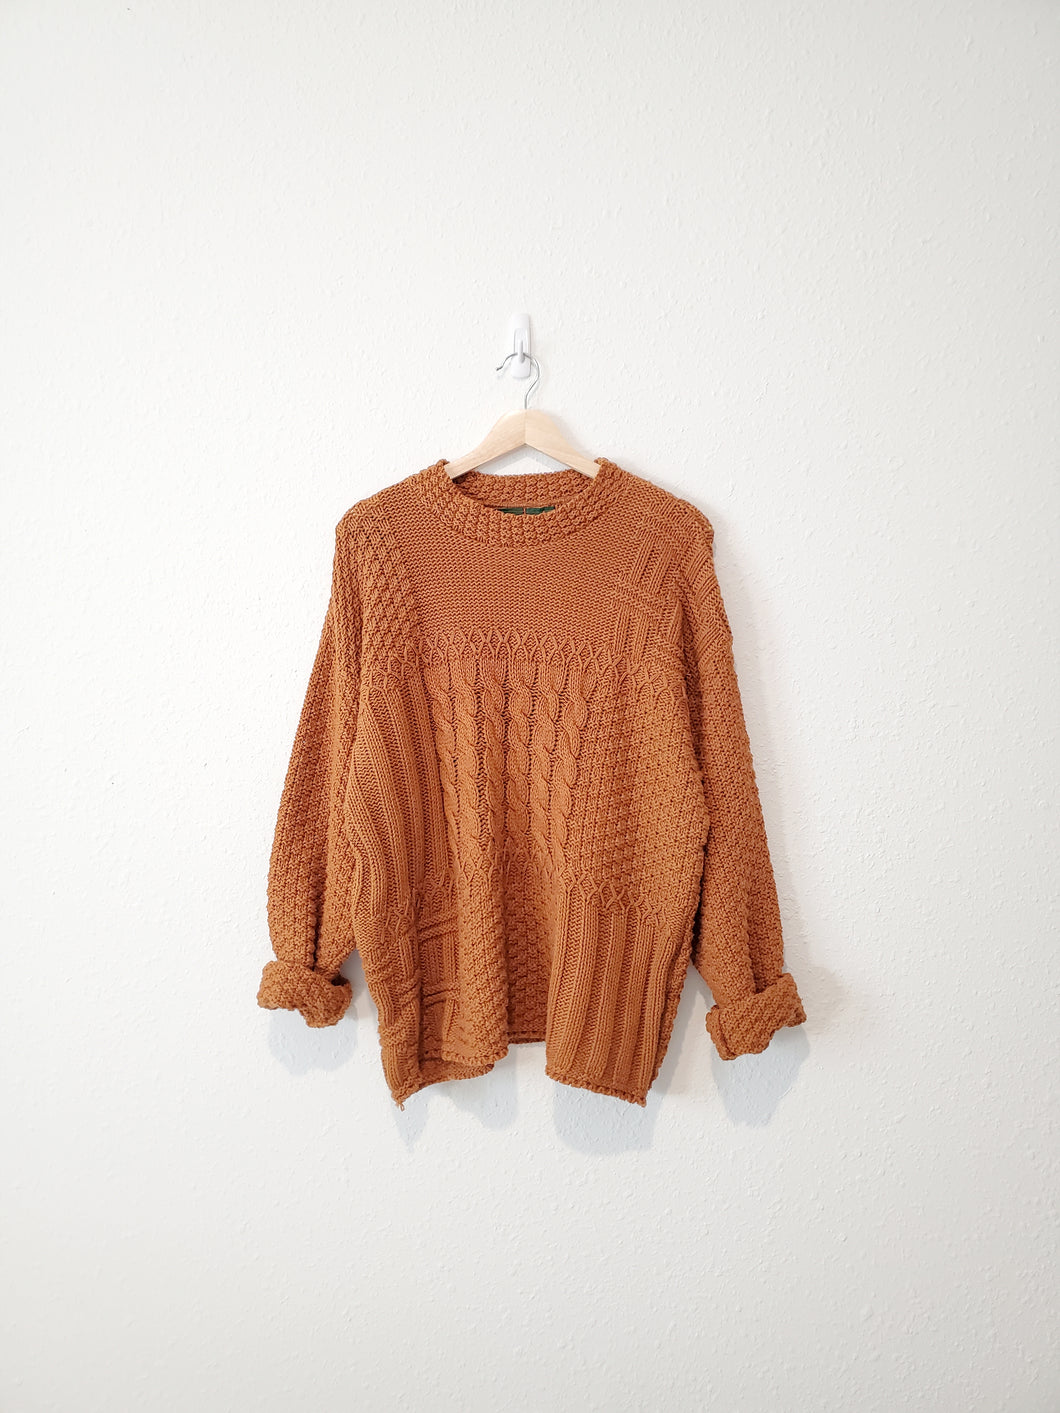 Vintage Chunky Cable Knit Sweater (M)